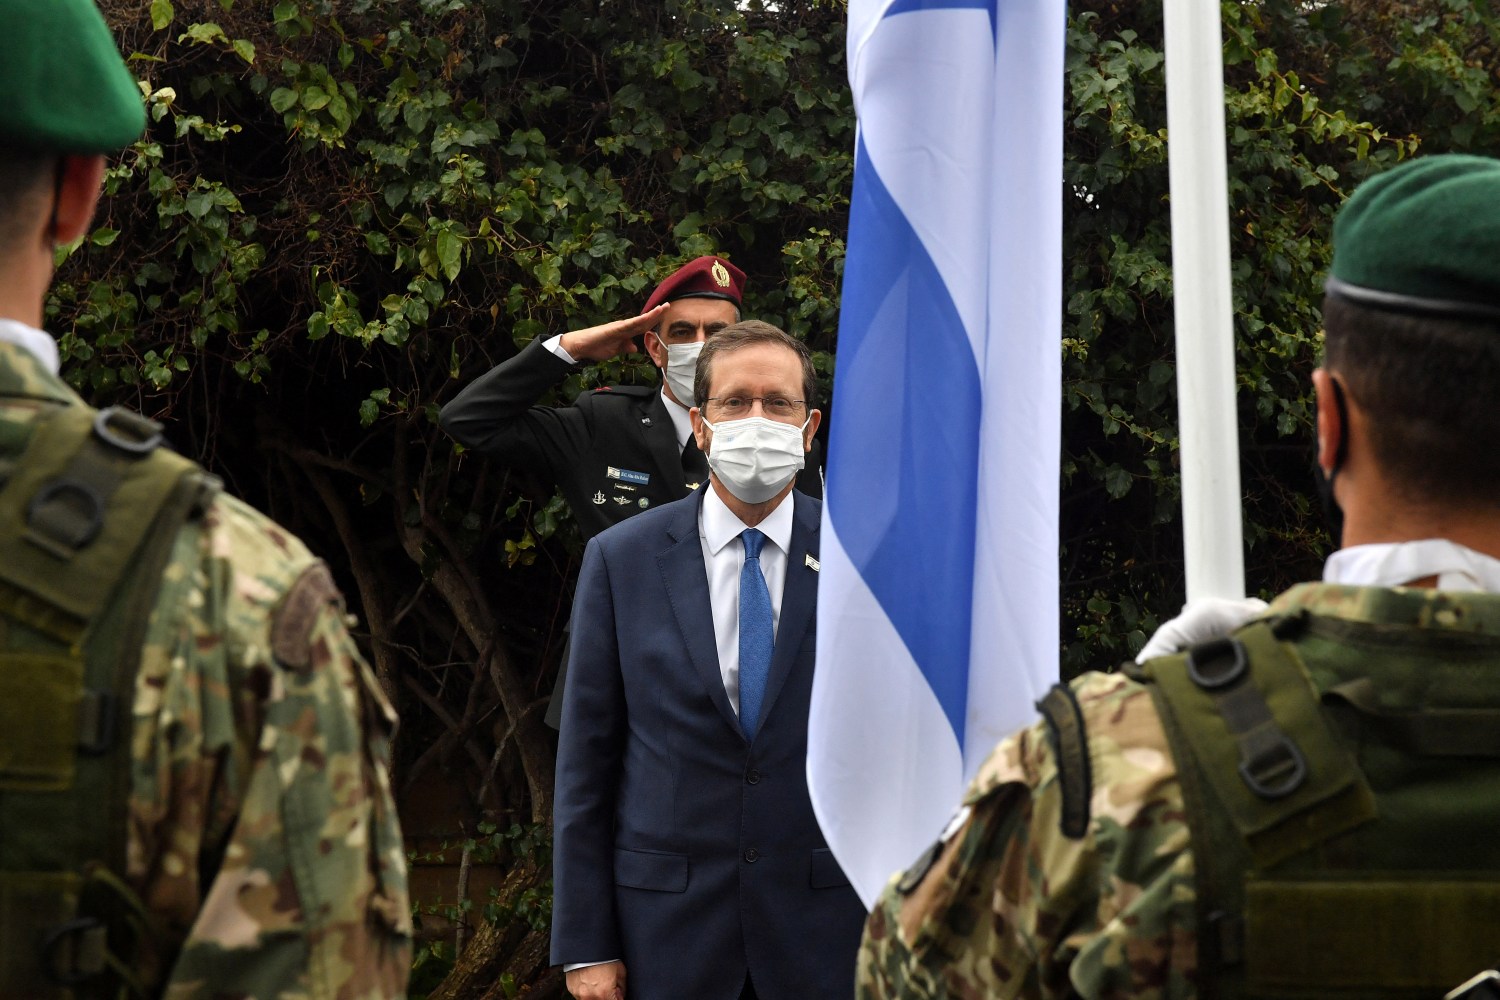 Israeli President Isaac Herzog reviews the Cypriot President Honour Guard in Nicosia during an official meeting in Nicosia, Cyprus, March 2, 2022. Iakovos Hatzistavrou/Pool via REUTERS